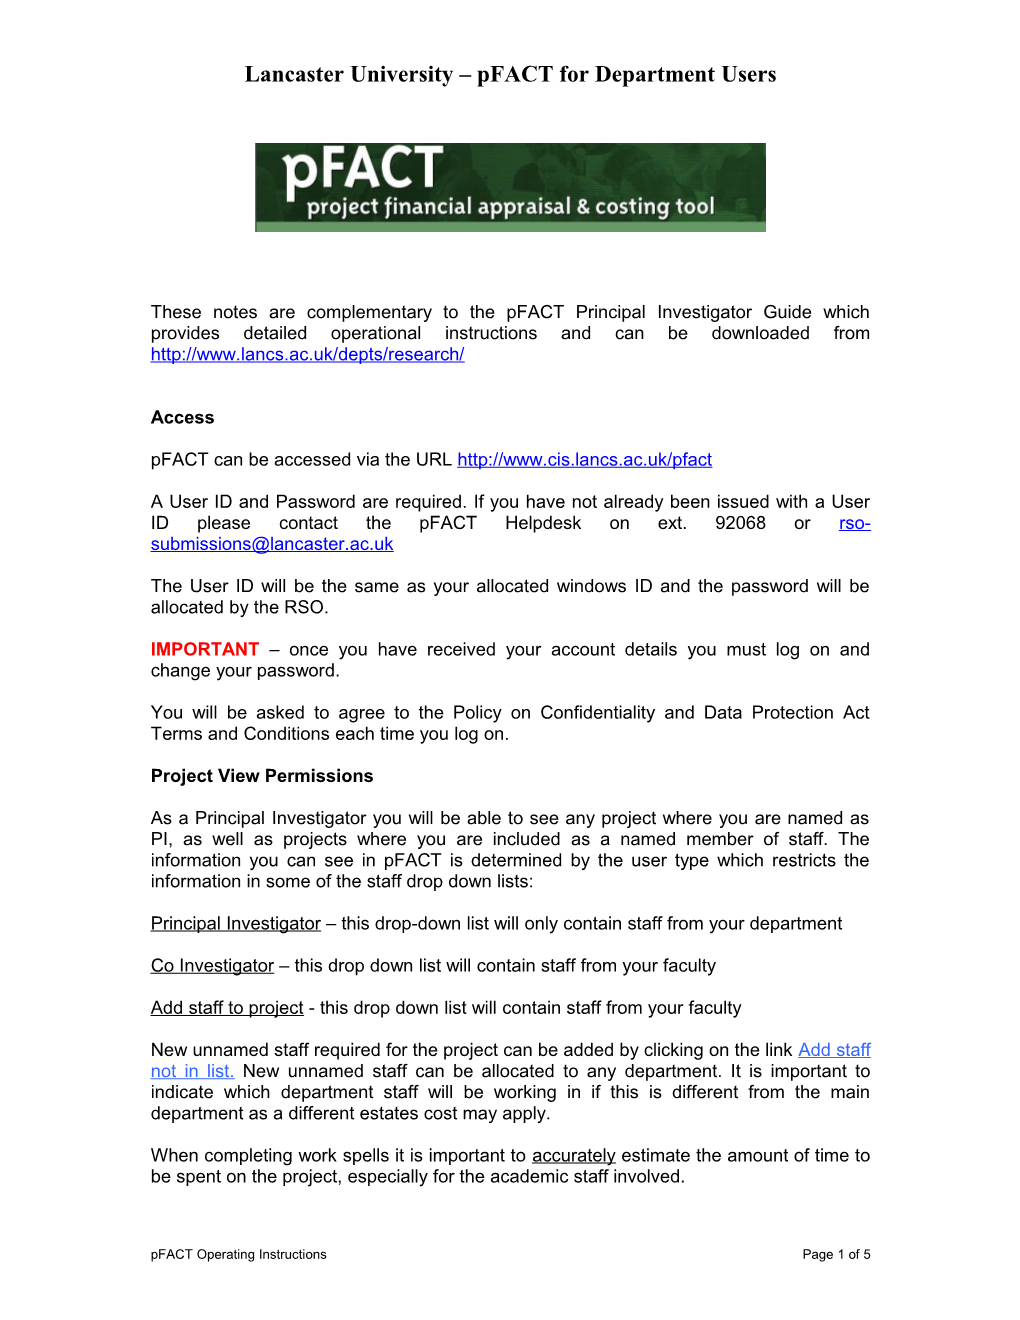 Lancaster University Pfact for Department Users